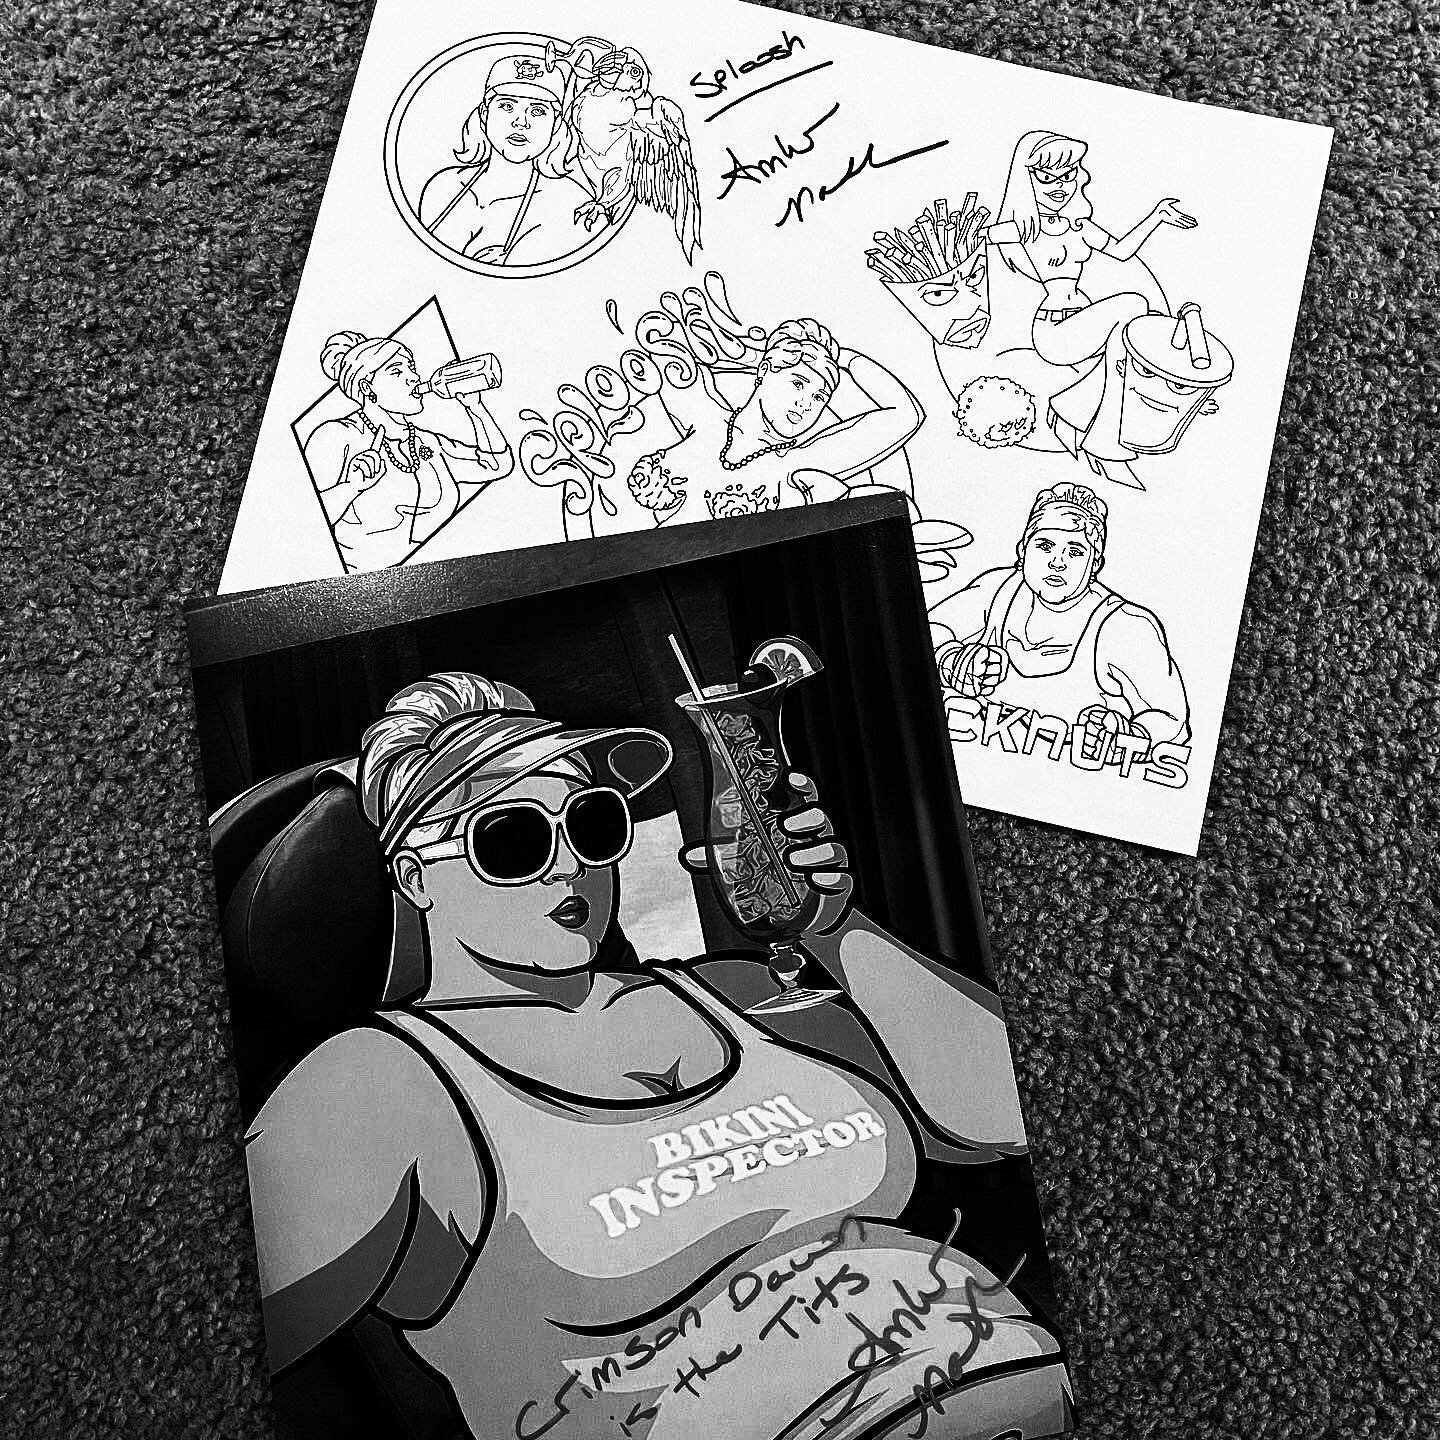 My Art haul from @northernfancon that I still need some frames for and need to go up in @crimsondawncollective.
😝🙌🏼
@ambercnash signed flash sheet. Can&rsquo;t wait to tattoo &ldquo;sploosh&rdquo; flash soon&hellip; 

@sheldonbueckertart 
@johnnik